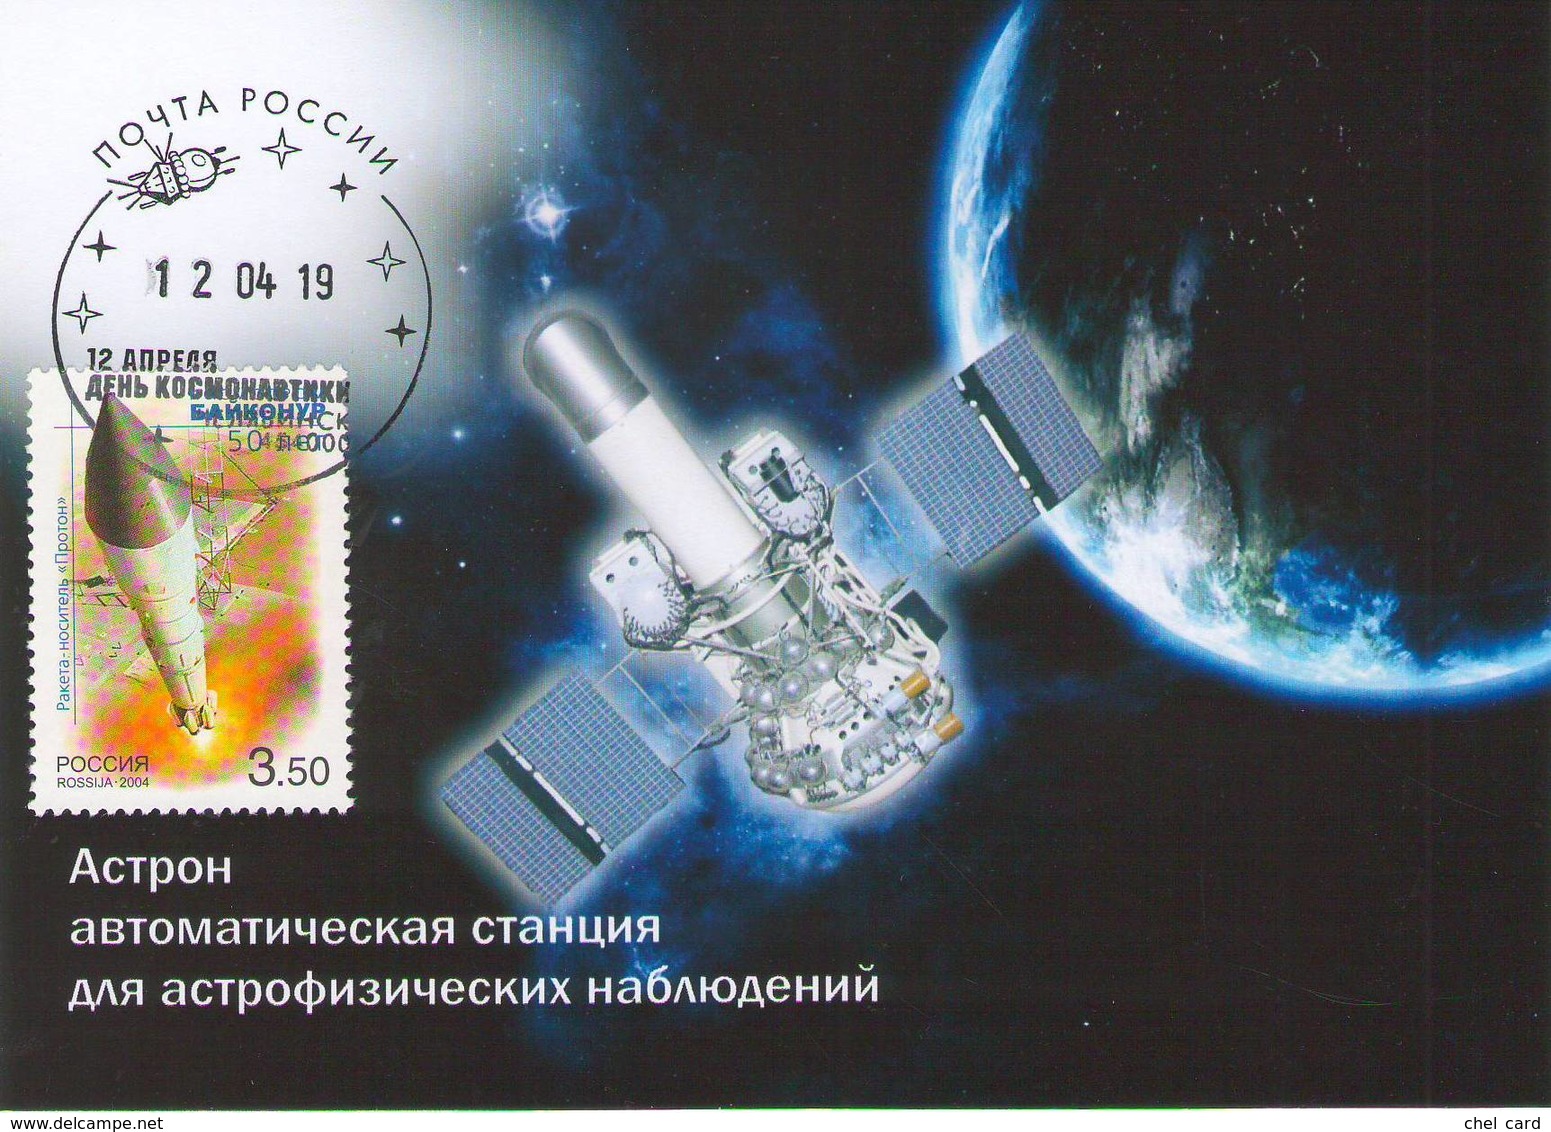 [2019, Space, Physics, Astronomy] Maximum Card. Postcard "Astron. Automatic Station For Astrophysical Observations" - Russia